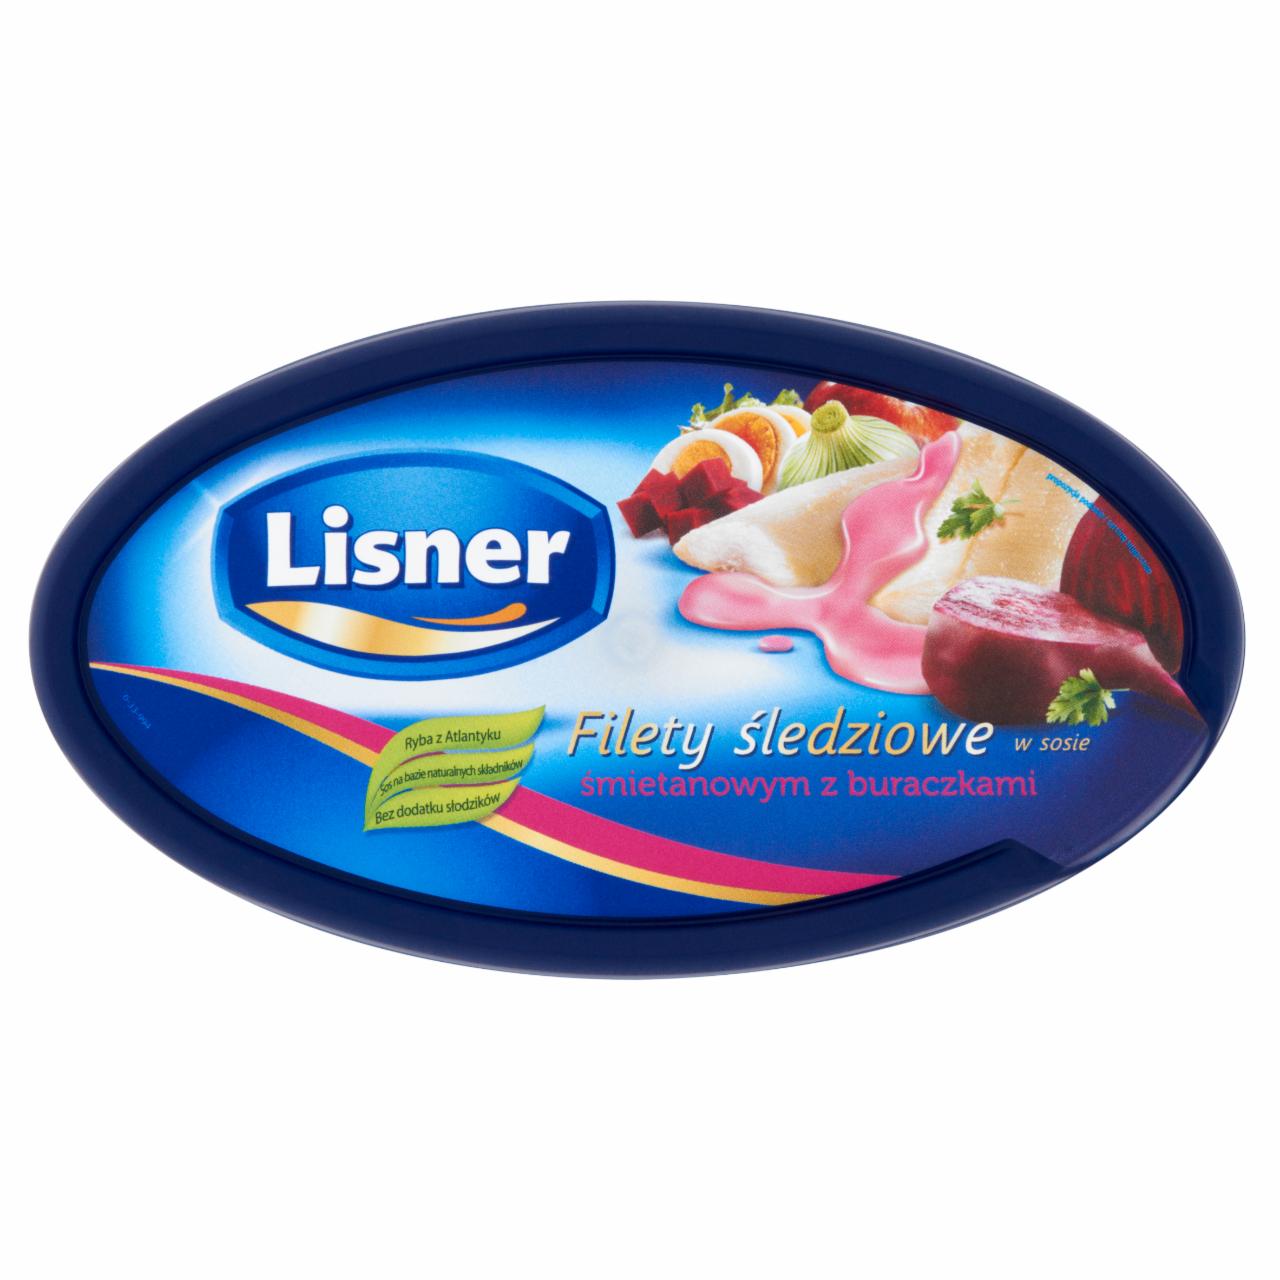 Photo - Lisner Herring Fillets in Cream Sauce with Beets 280 g